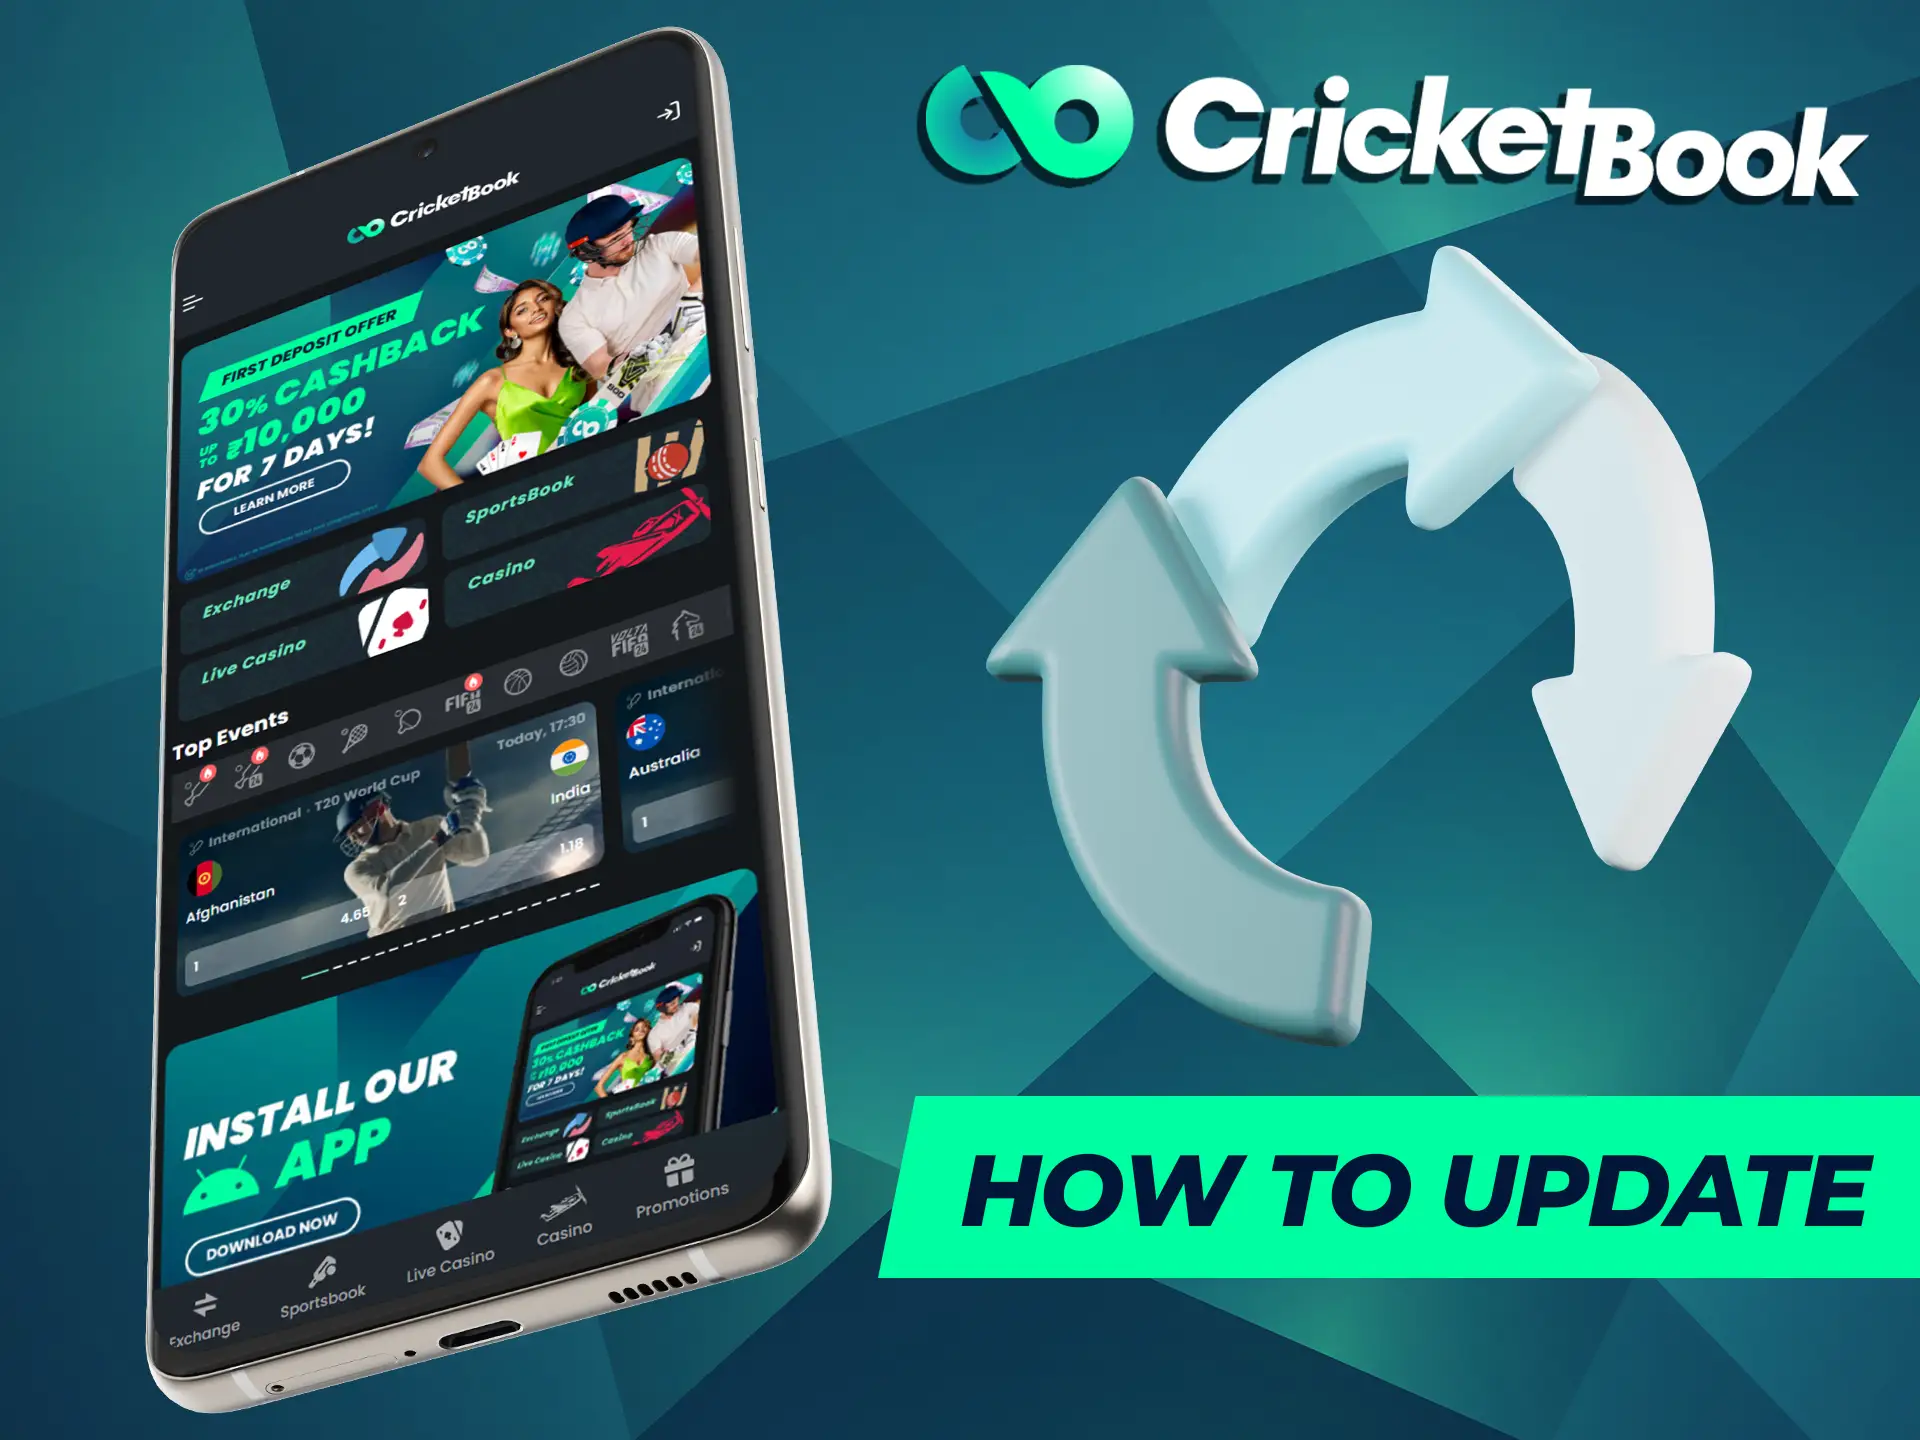 Instructions on how to update the CricketBook app in India.